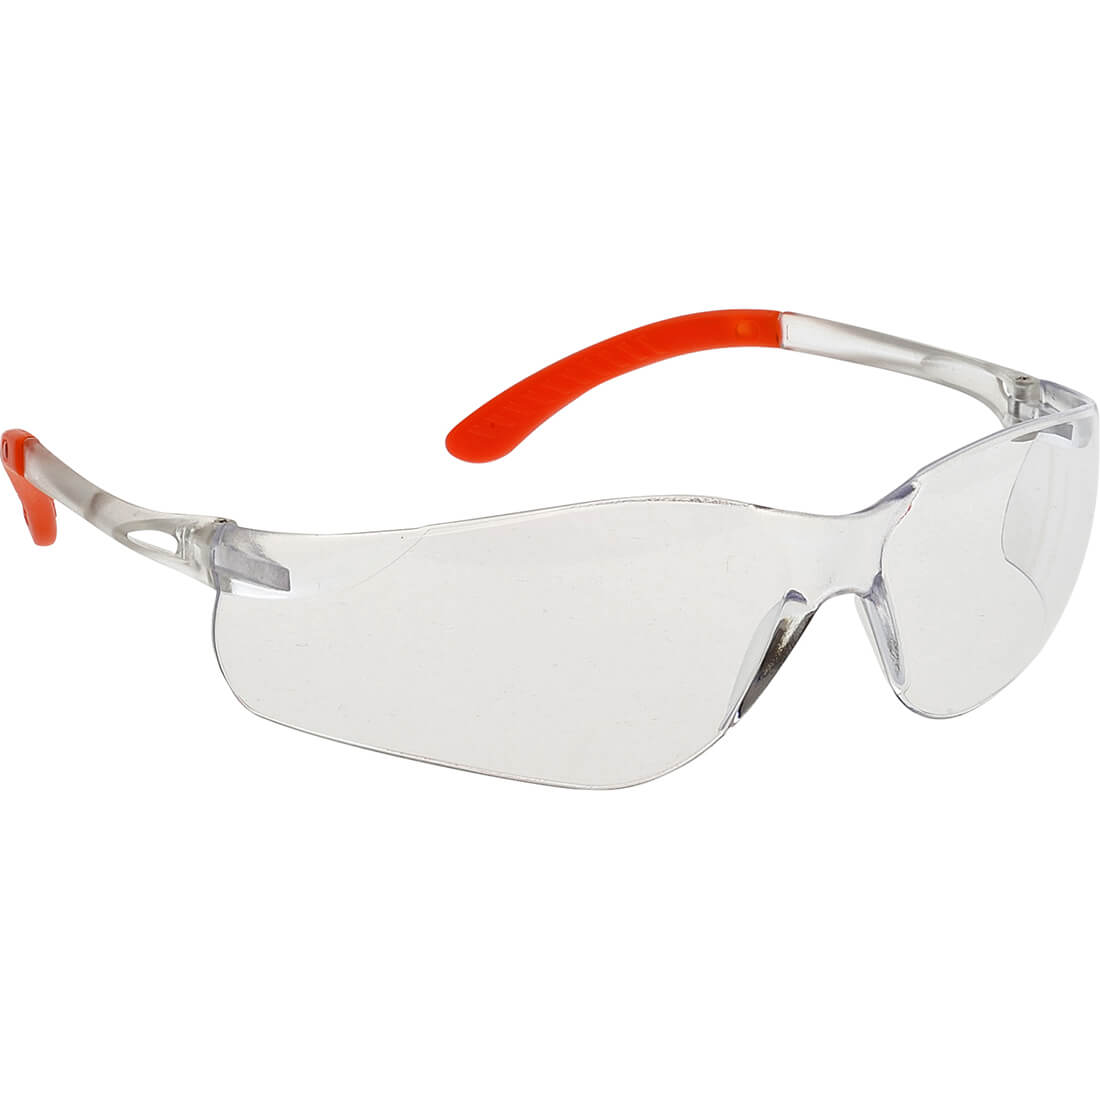 Portwest PW38 - Clear Lens Orange Frame Safety Glasses Pan View CE certified